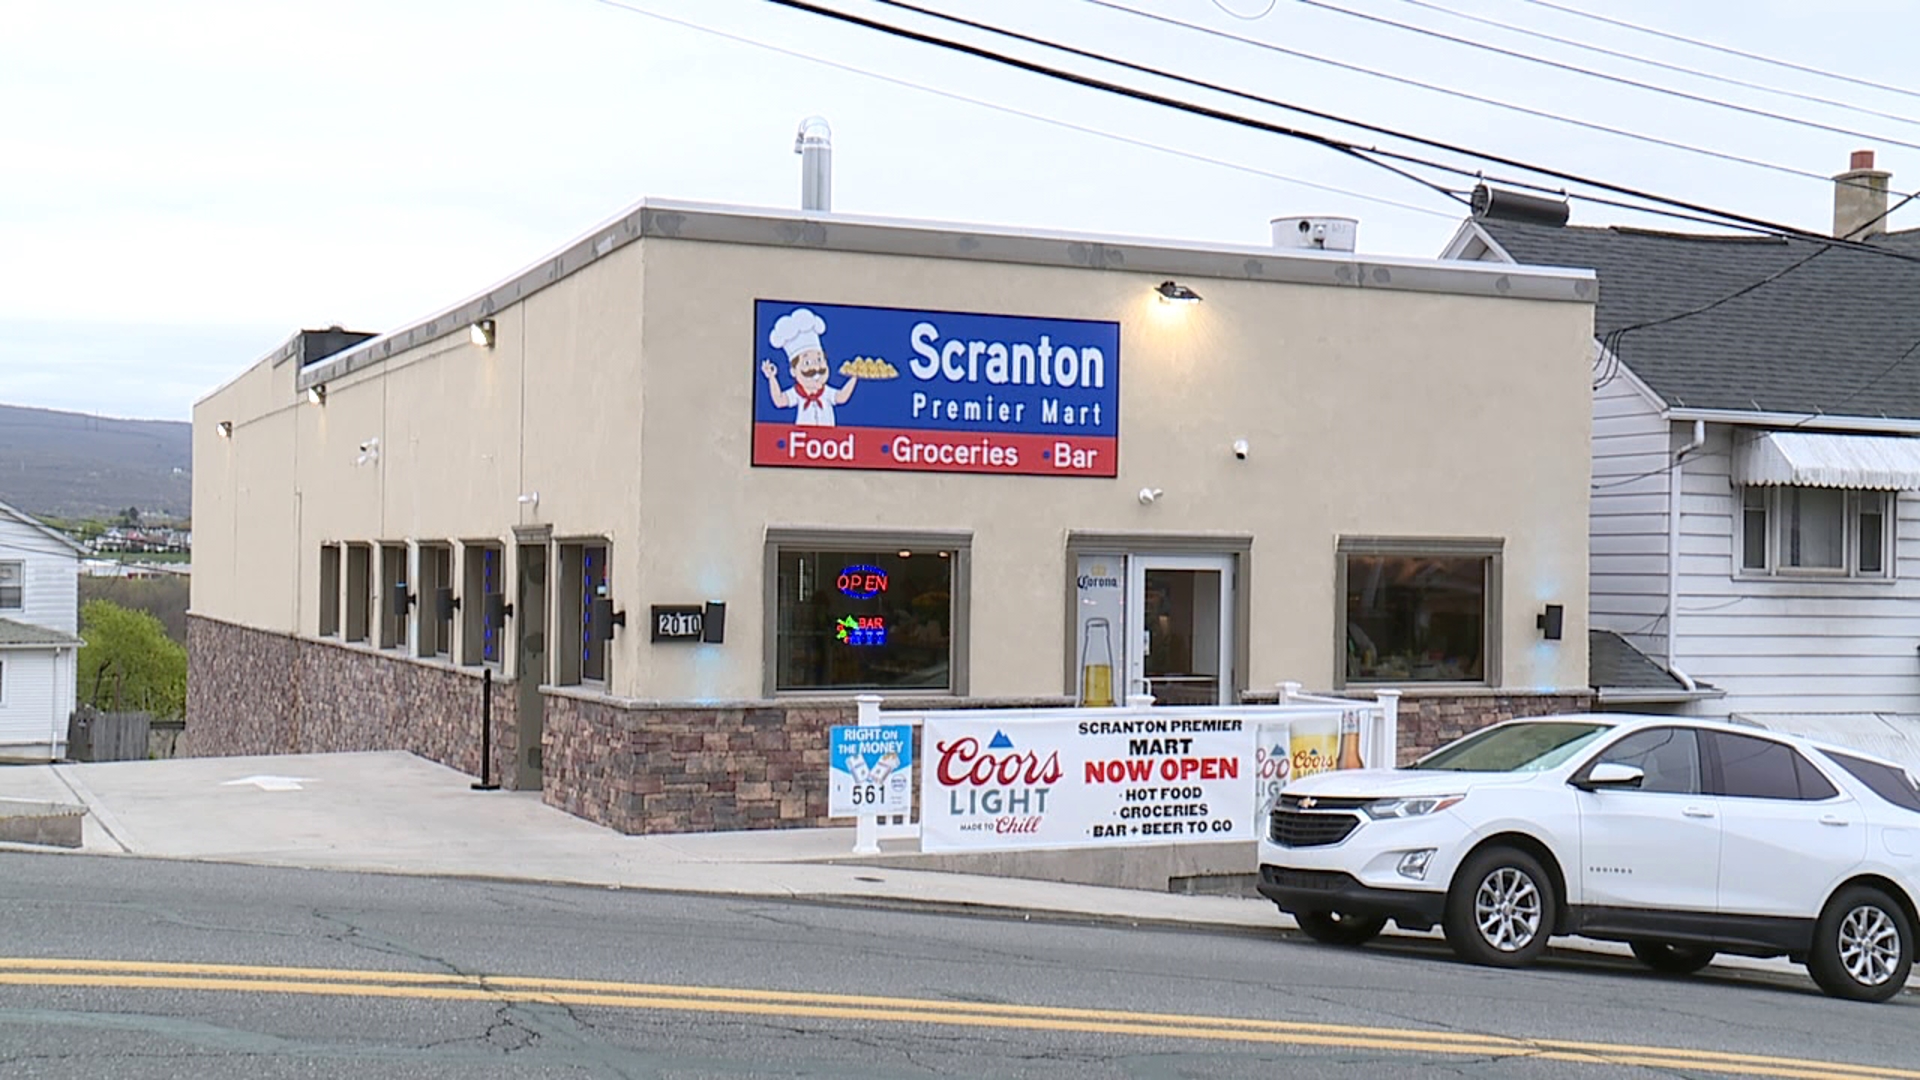 A new spot in Scranton offers cultural cuisine, groceries, and a bar inside the market.